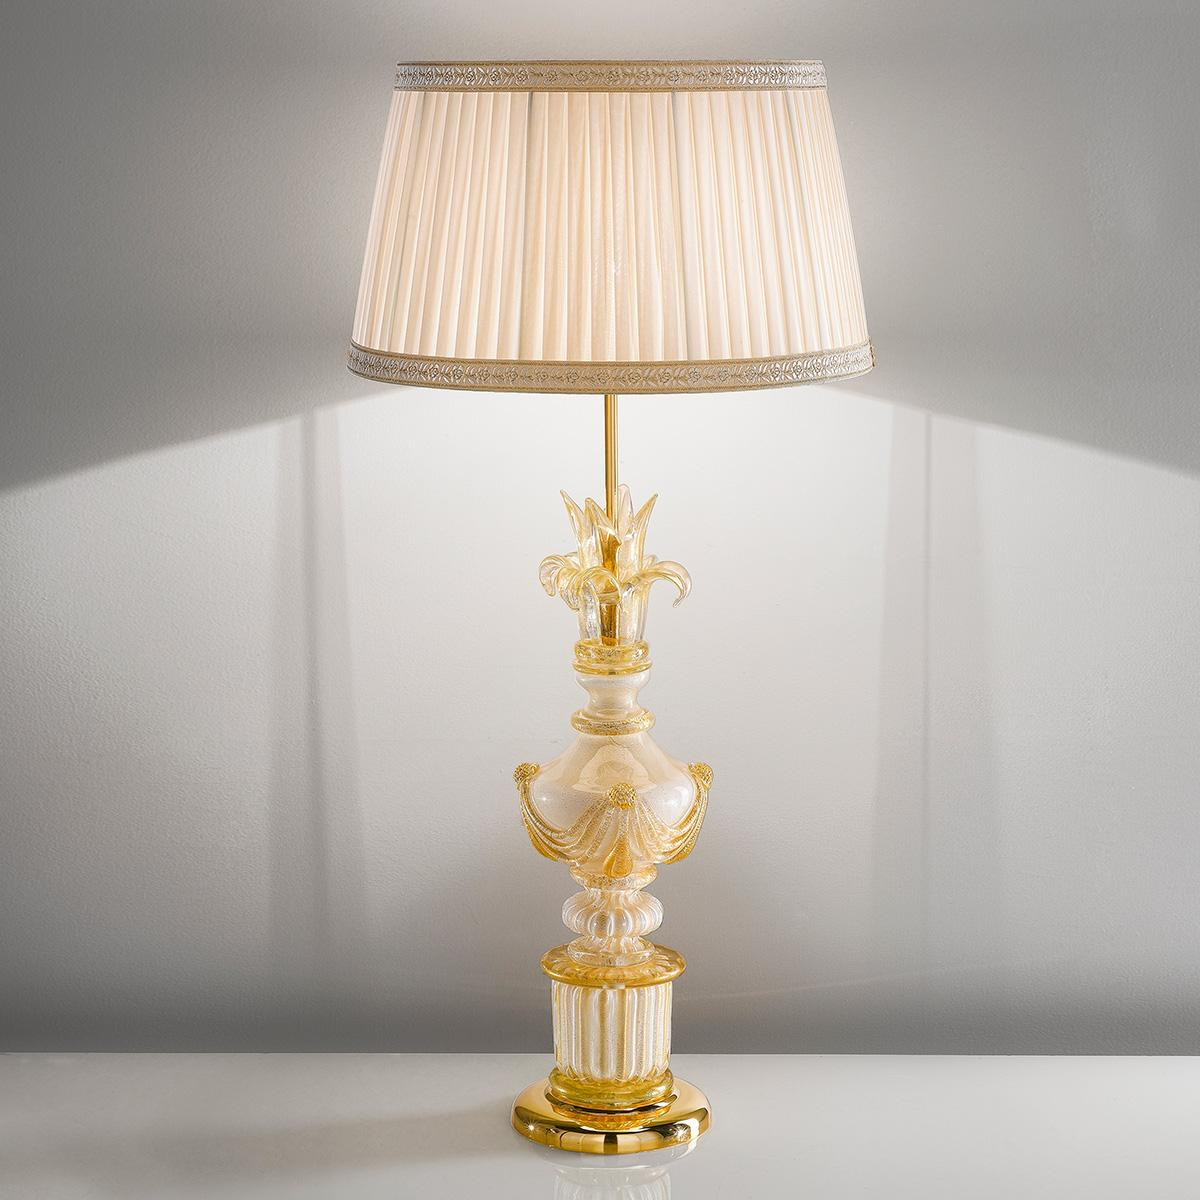 "Felicia" Murano glass table lamp - 1 light - white and gold